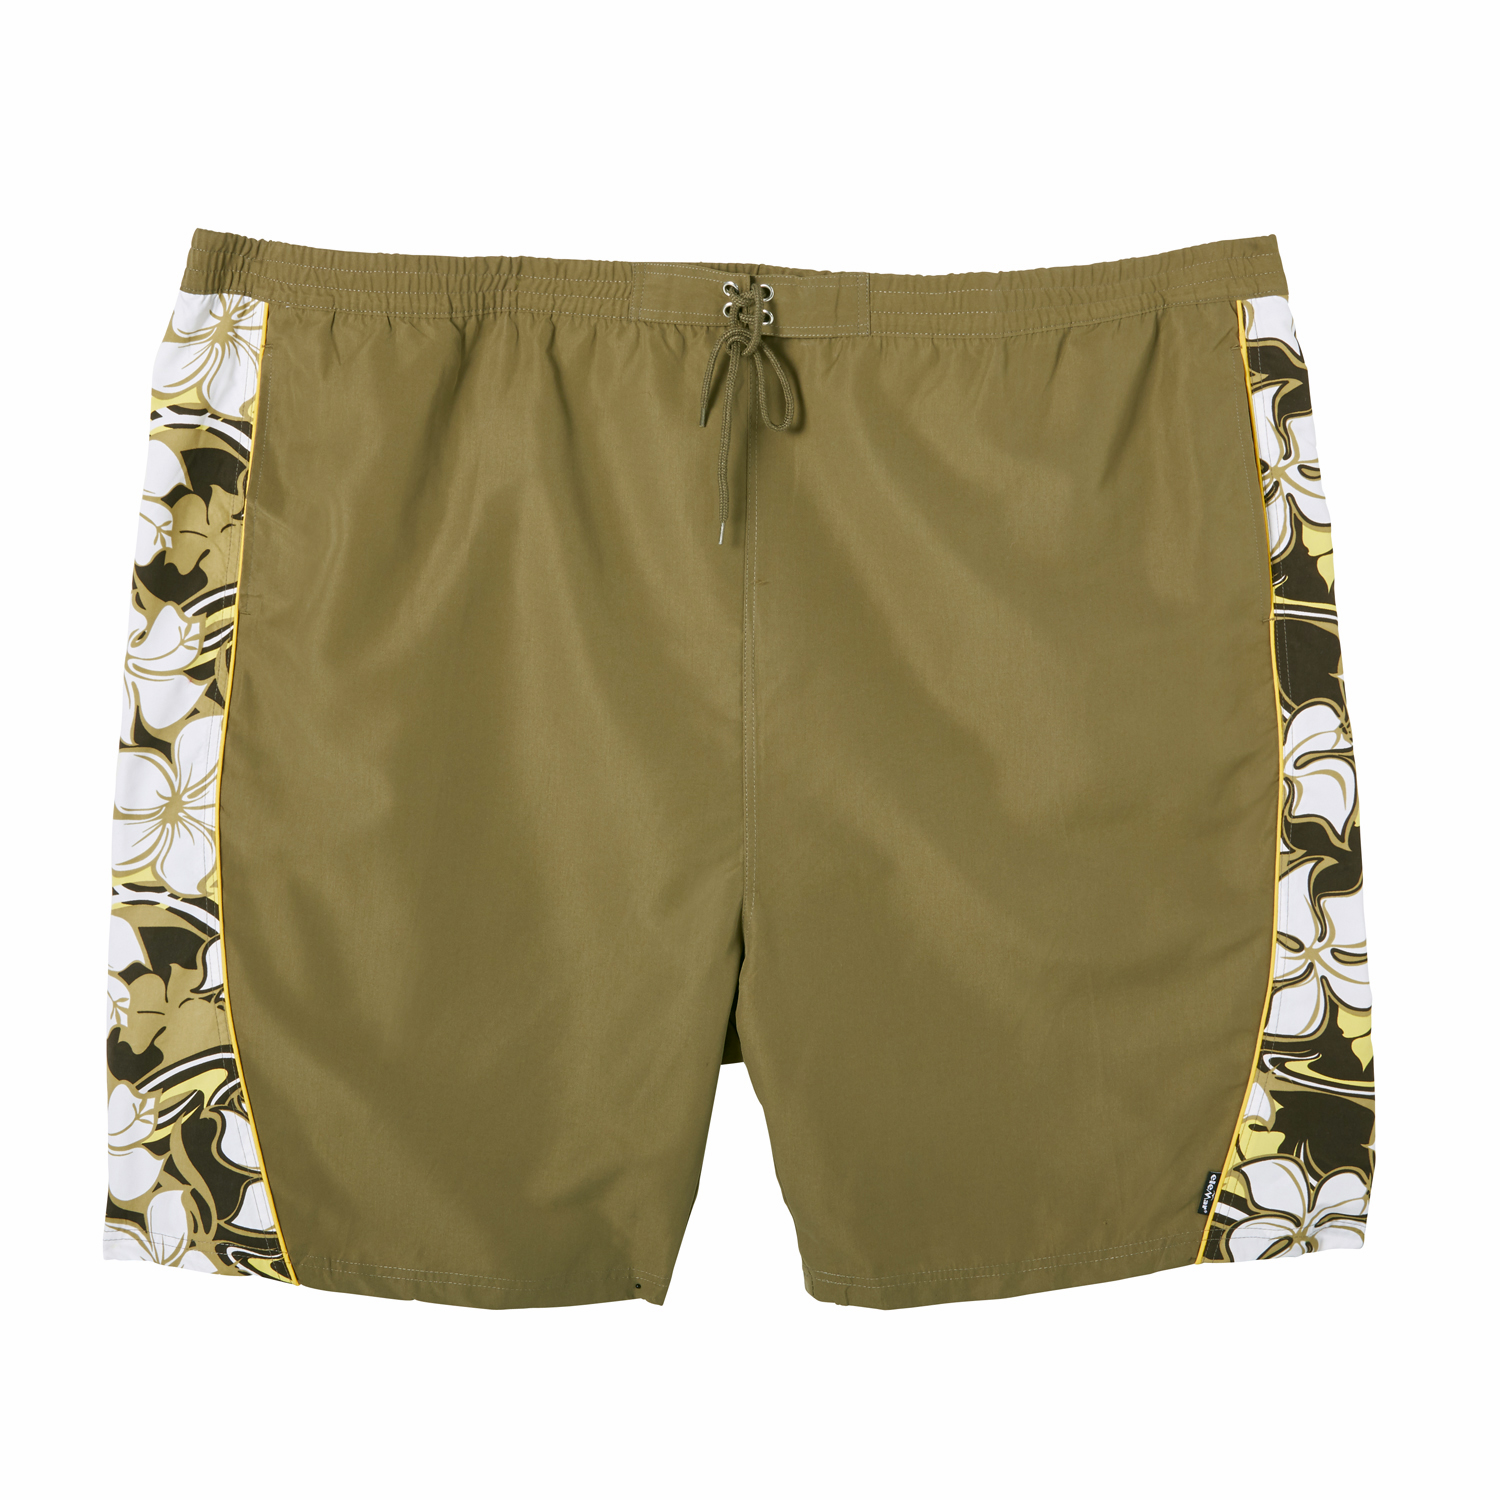 Swim bermudas by eleMar for men khaki patterned in oversizes up to 10XL